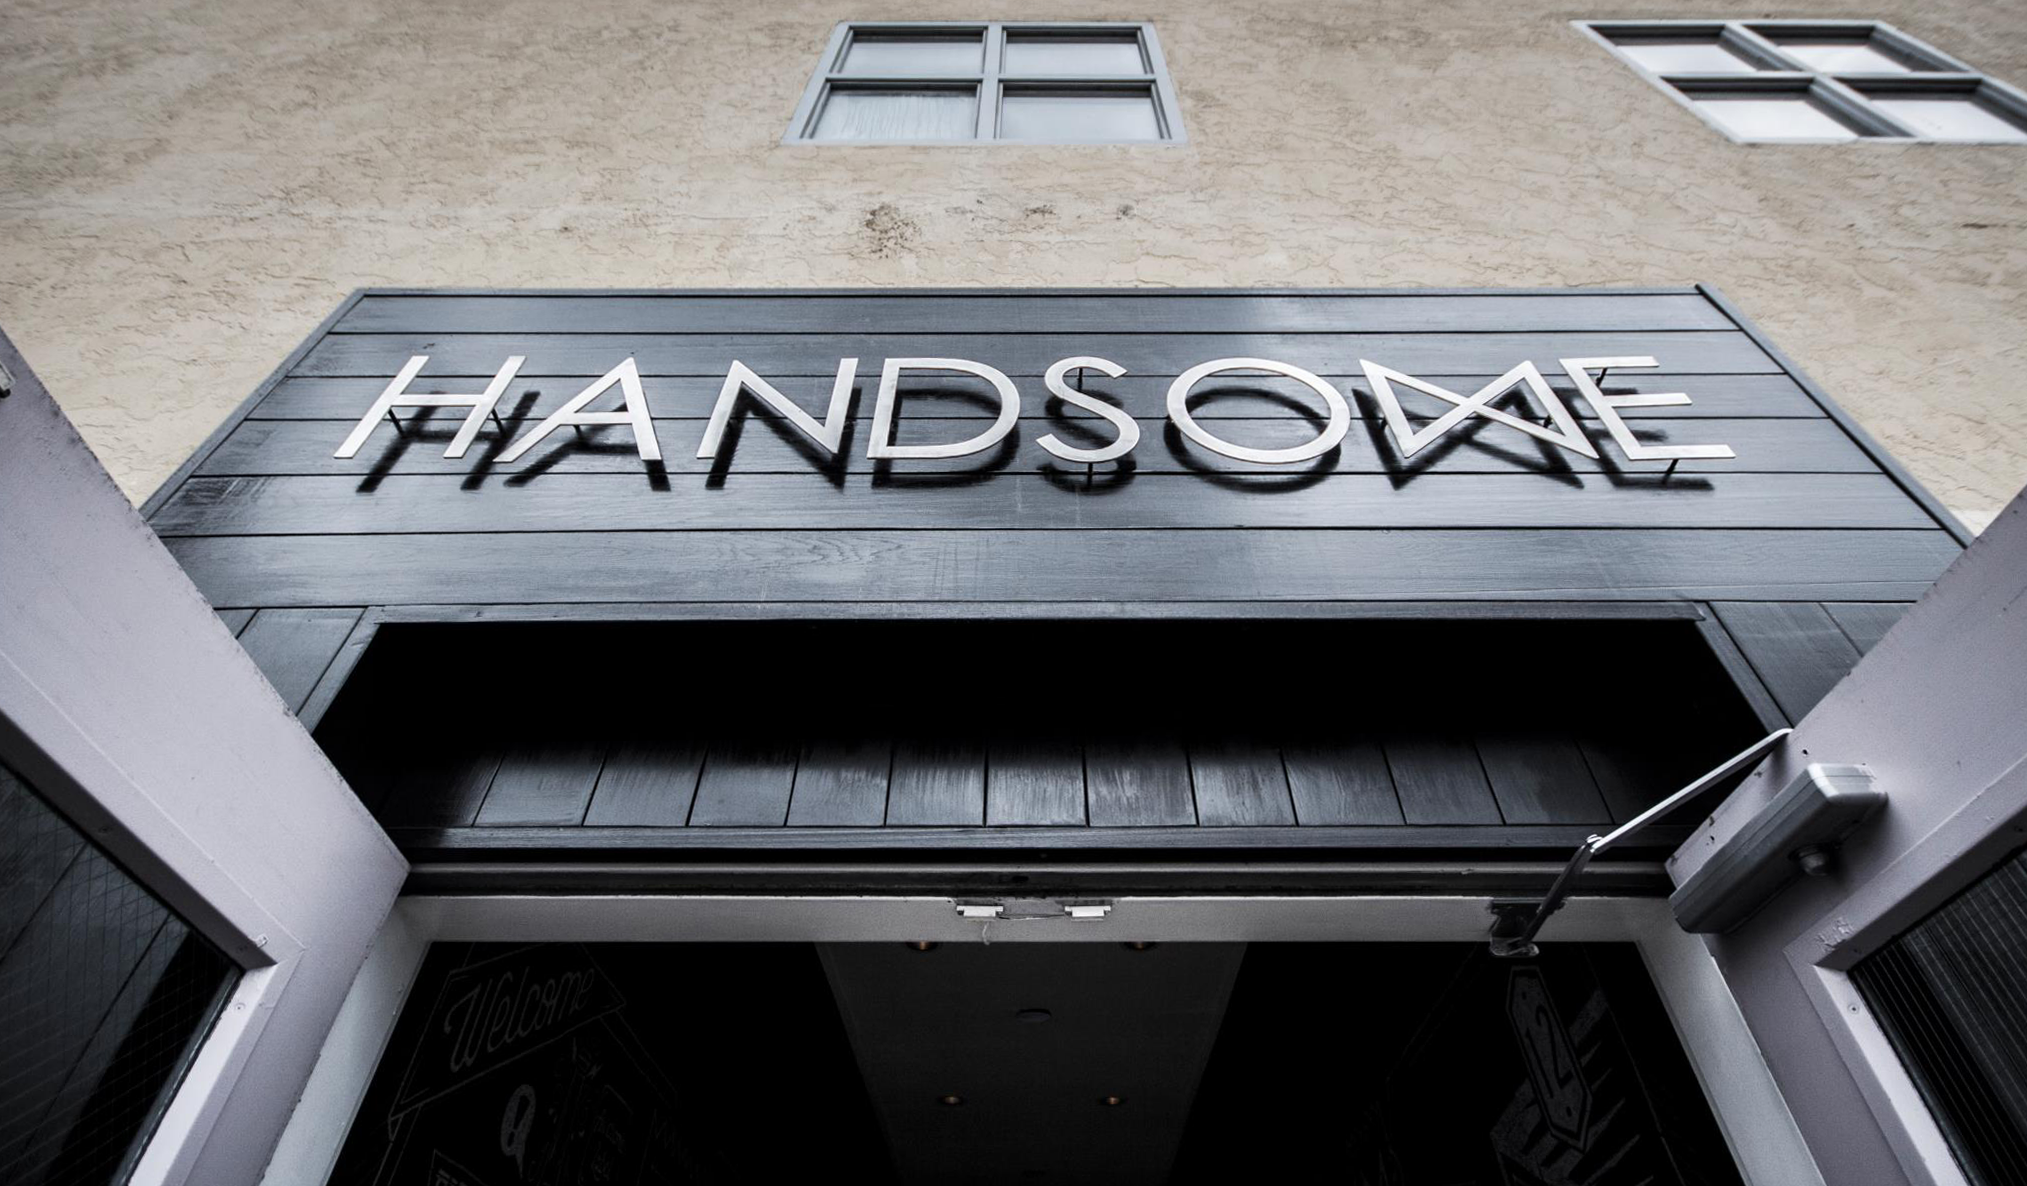 Handsome 5th street entrance by handsome on Dribbble